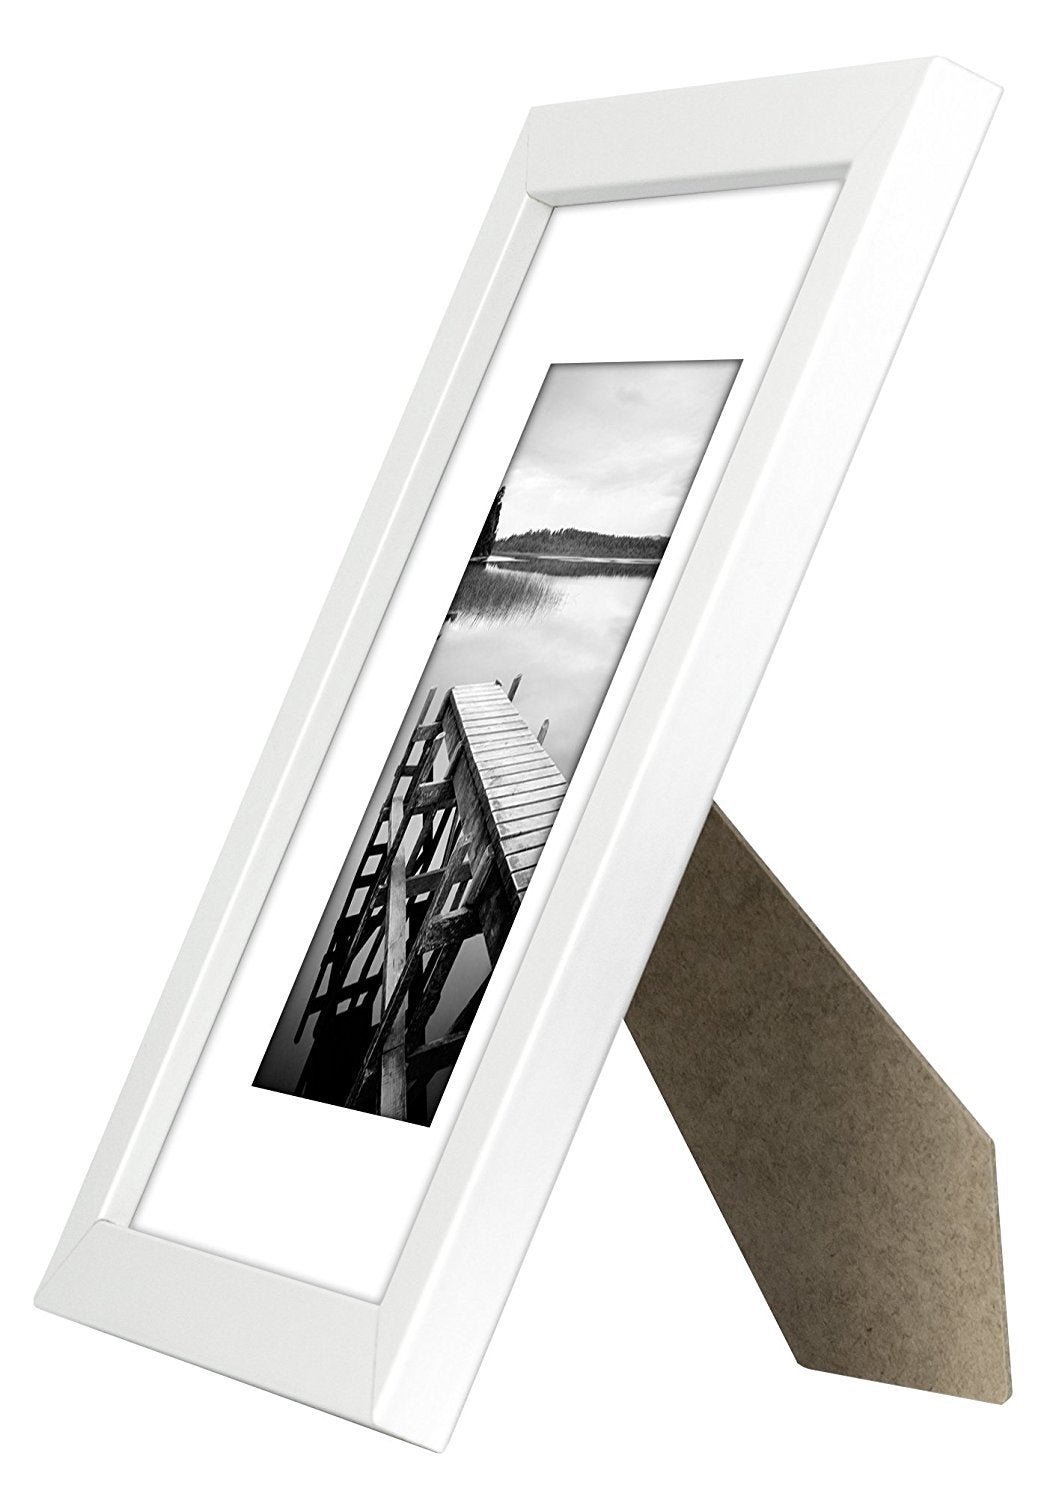 15 Pack - 8x10 White Picture Frames - Display Photographs 5x7 Inches With Mat or 8x10 Inches Without Mat - Highest Quality Materials - Picture Frame - Americanflat